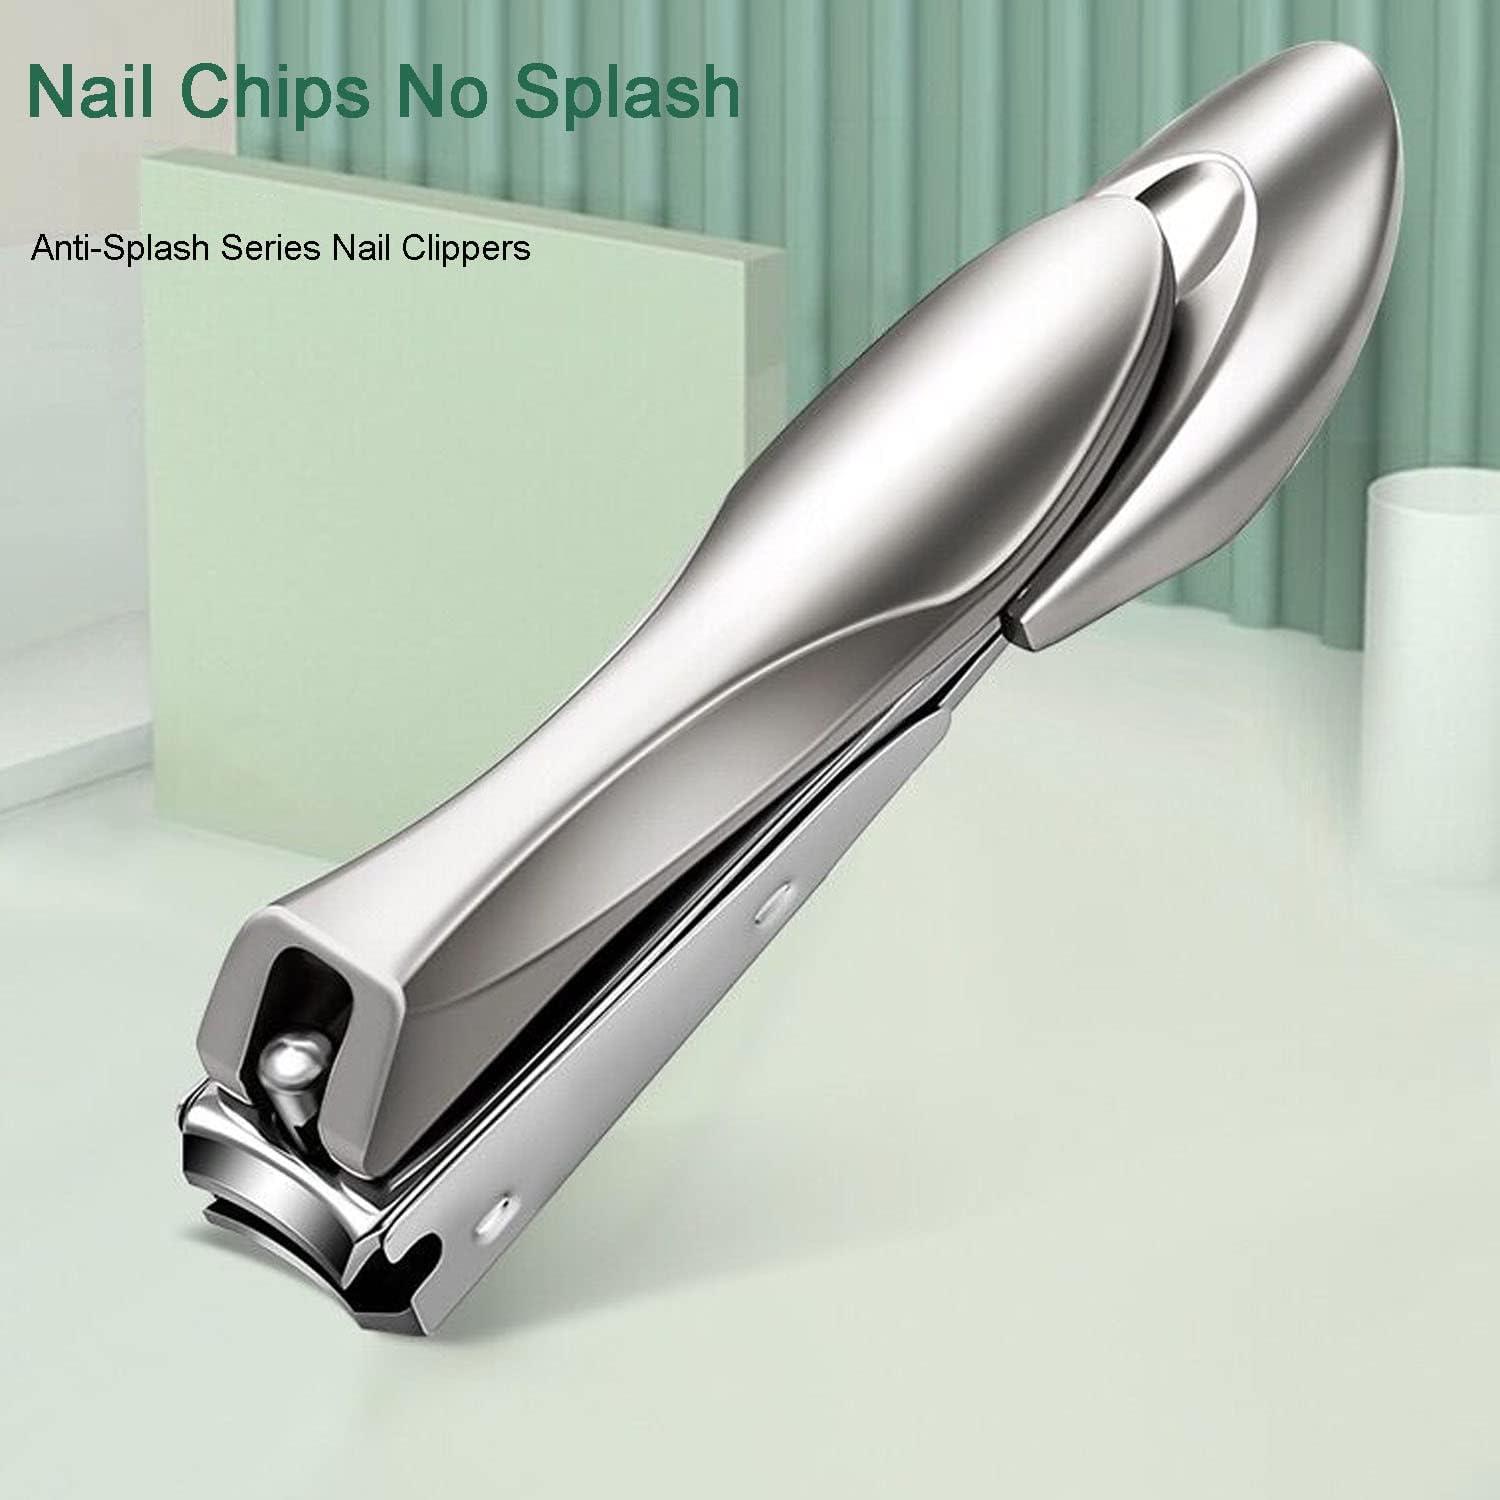 Amazon.com : GLAMFIELDS Nail Clipper with Catcher, No Splash Fingernail  Toenail Clipper Stainless Steel Nail Cutter Nail Trimmer, Good Gift for Men  and Women (MF-Large/Small) : Beauty & Personal Care